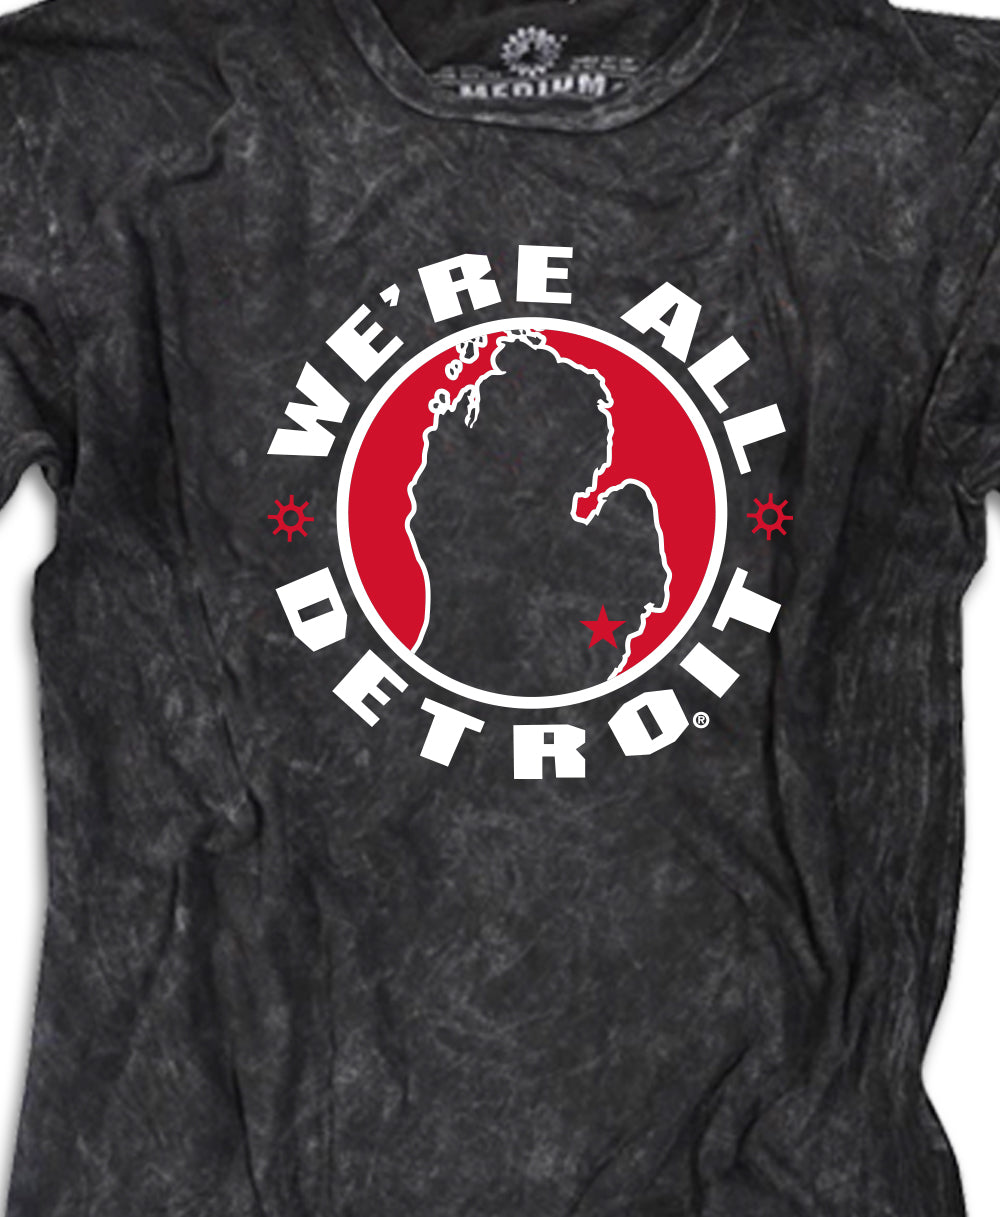 We're All Detroit - Mineral Wash